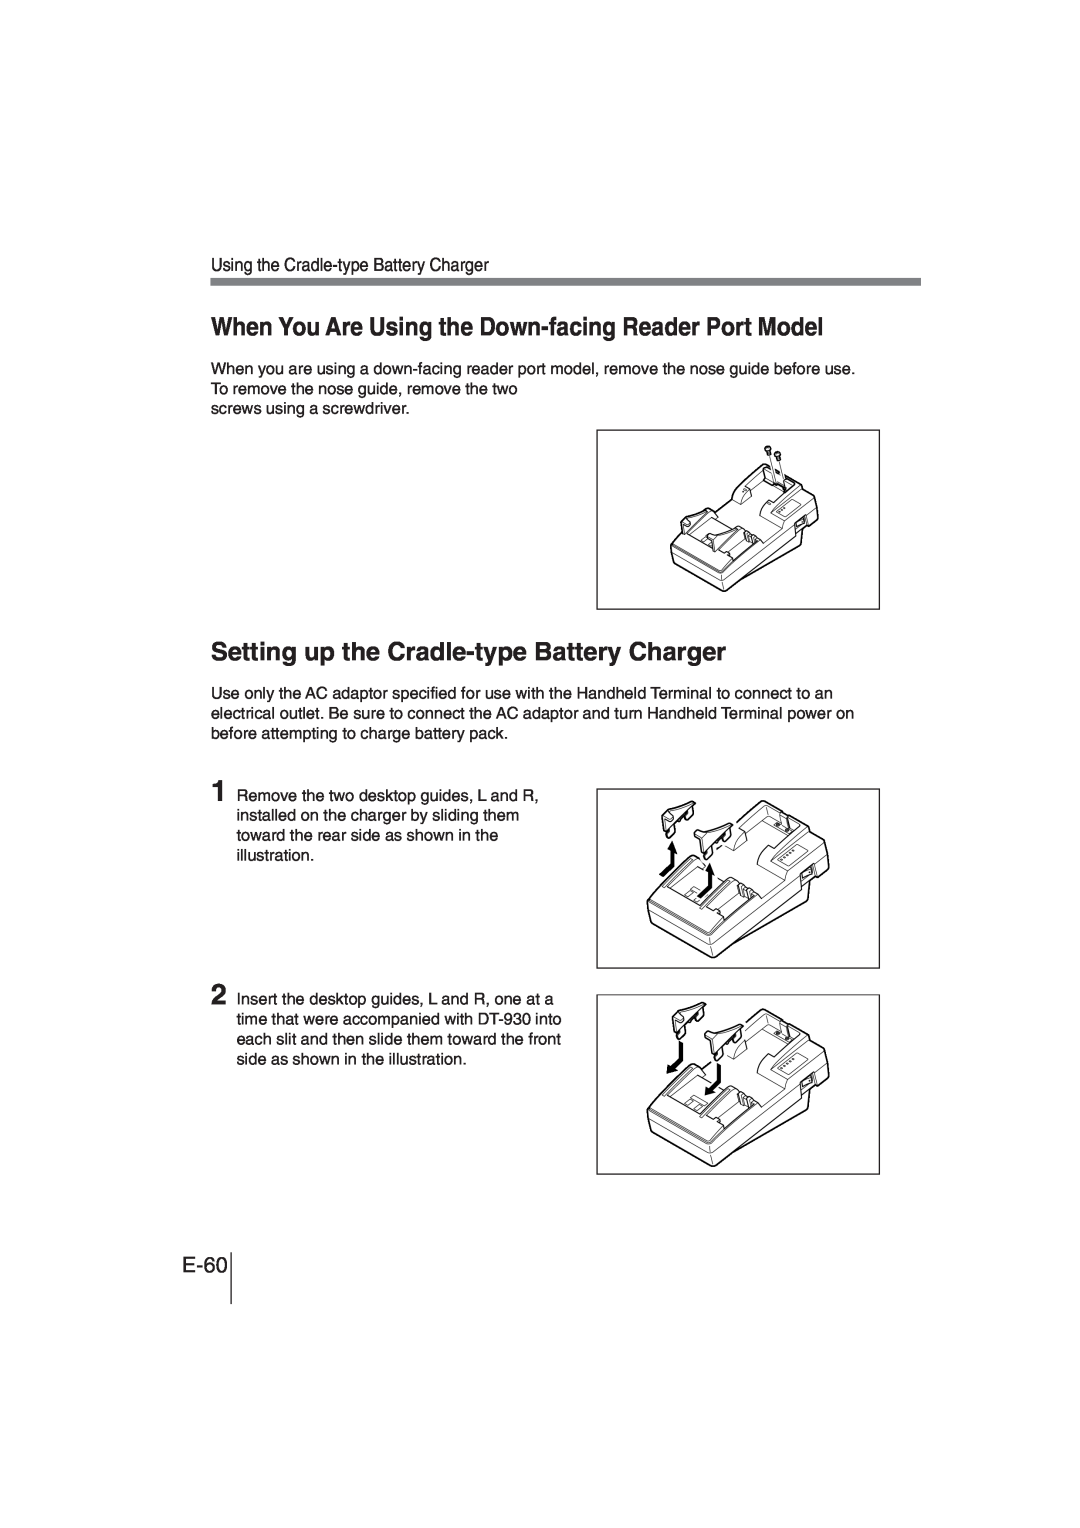 Casio DT-930 manual Setting up the Cradle-typeBattery Charger, E-60, Using the Cradle-typeBattery Charger 